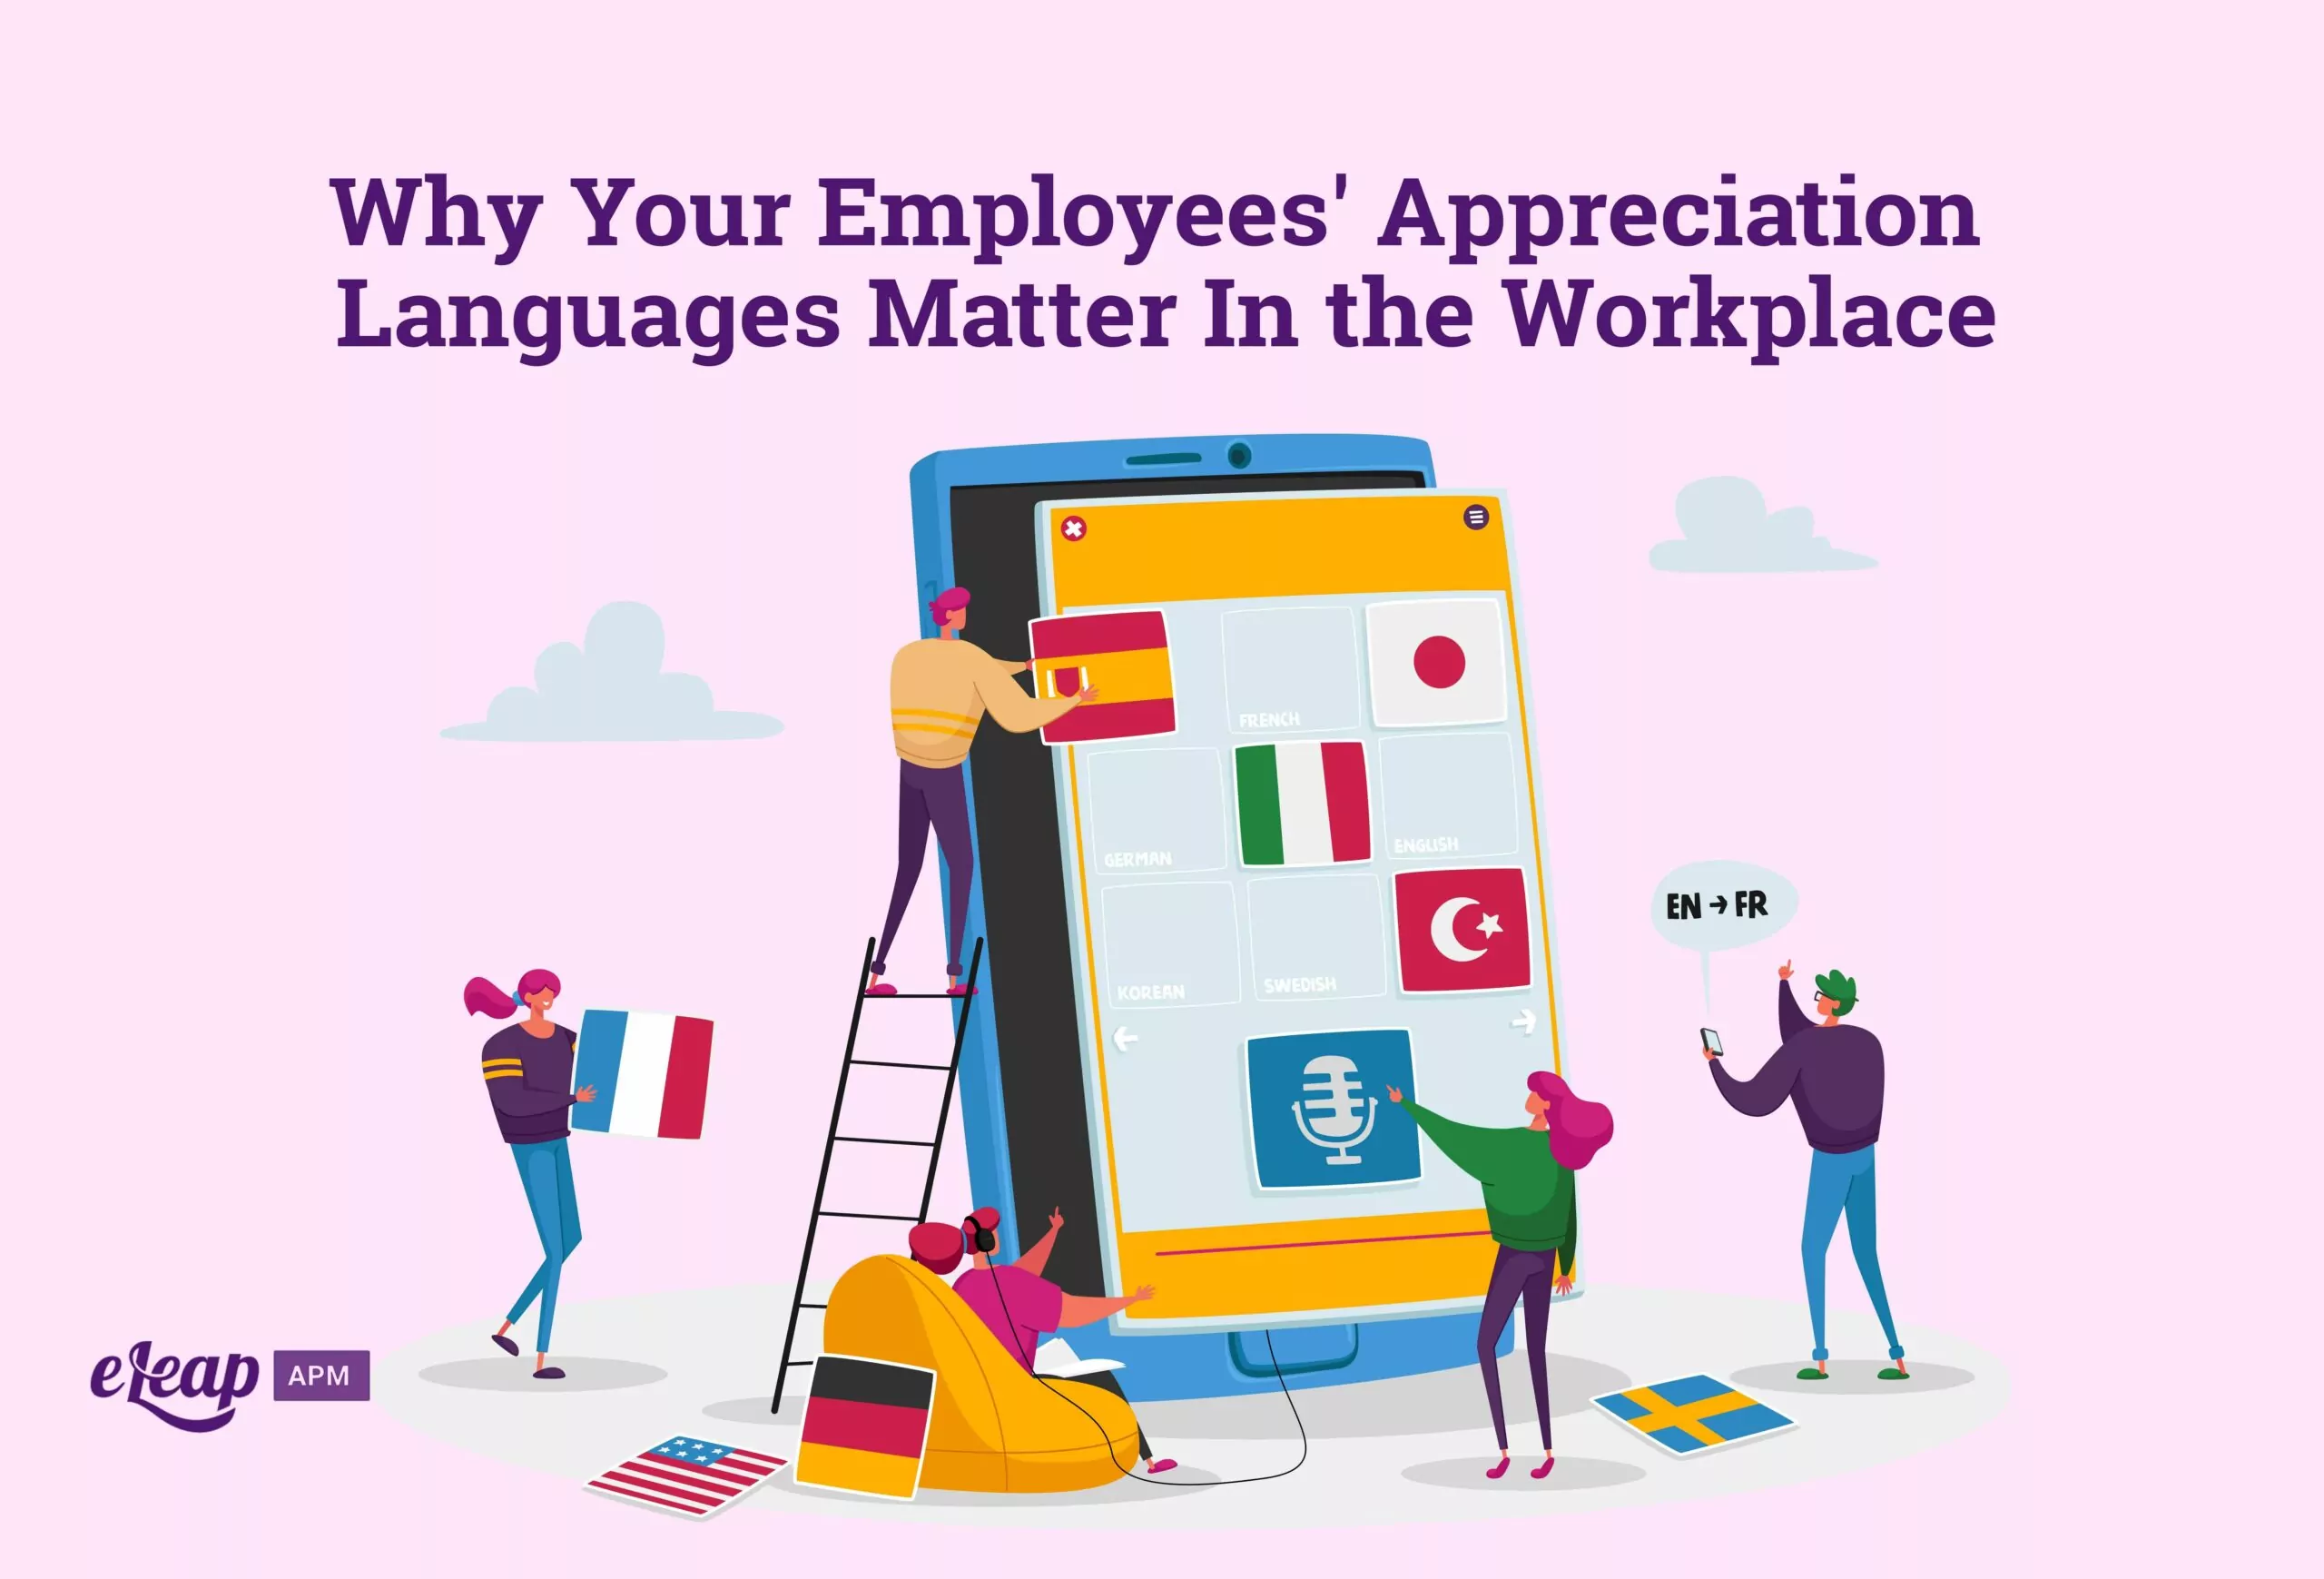 Why Your Employees' Appreciation Languages Matter In the Workplace